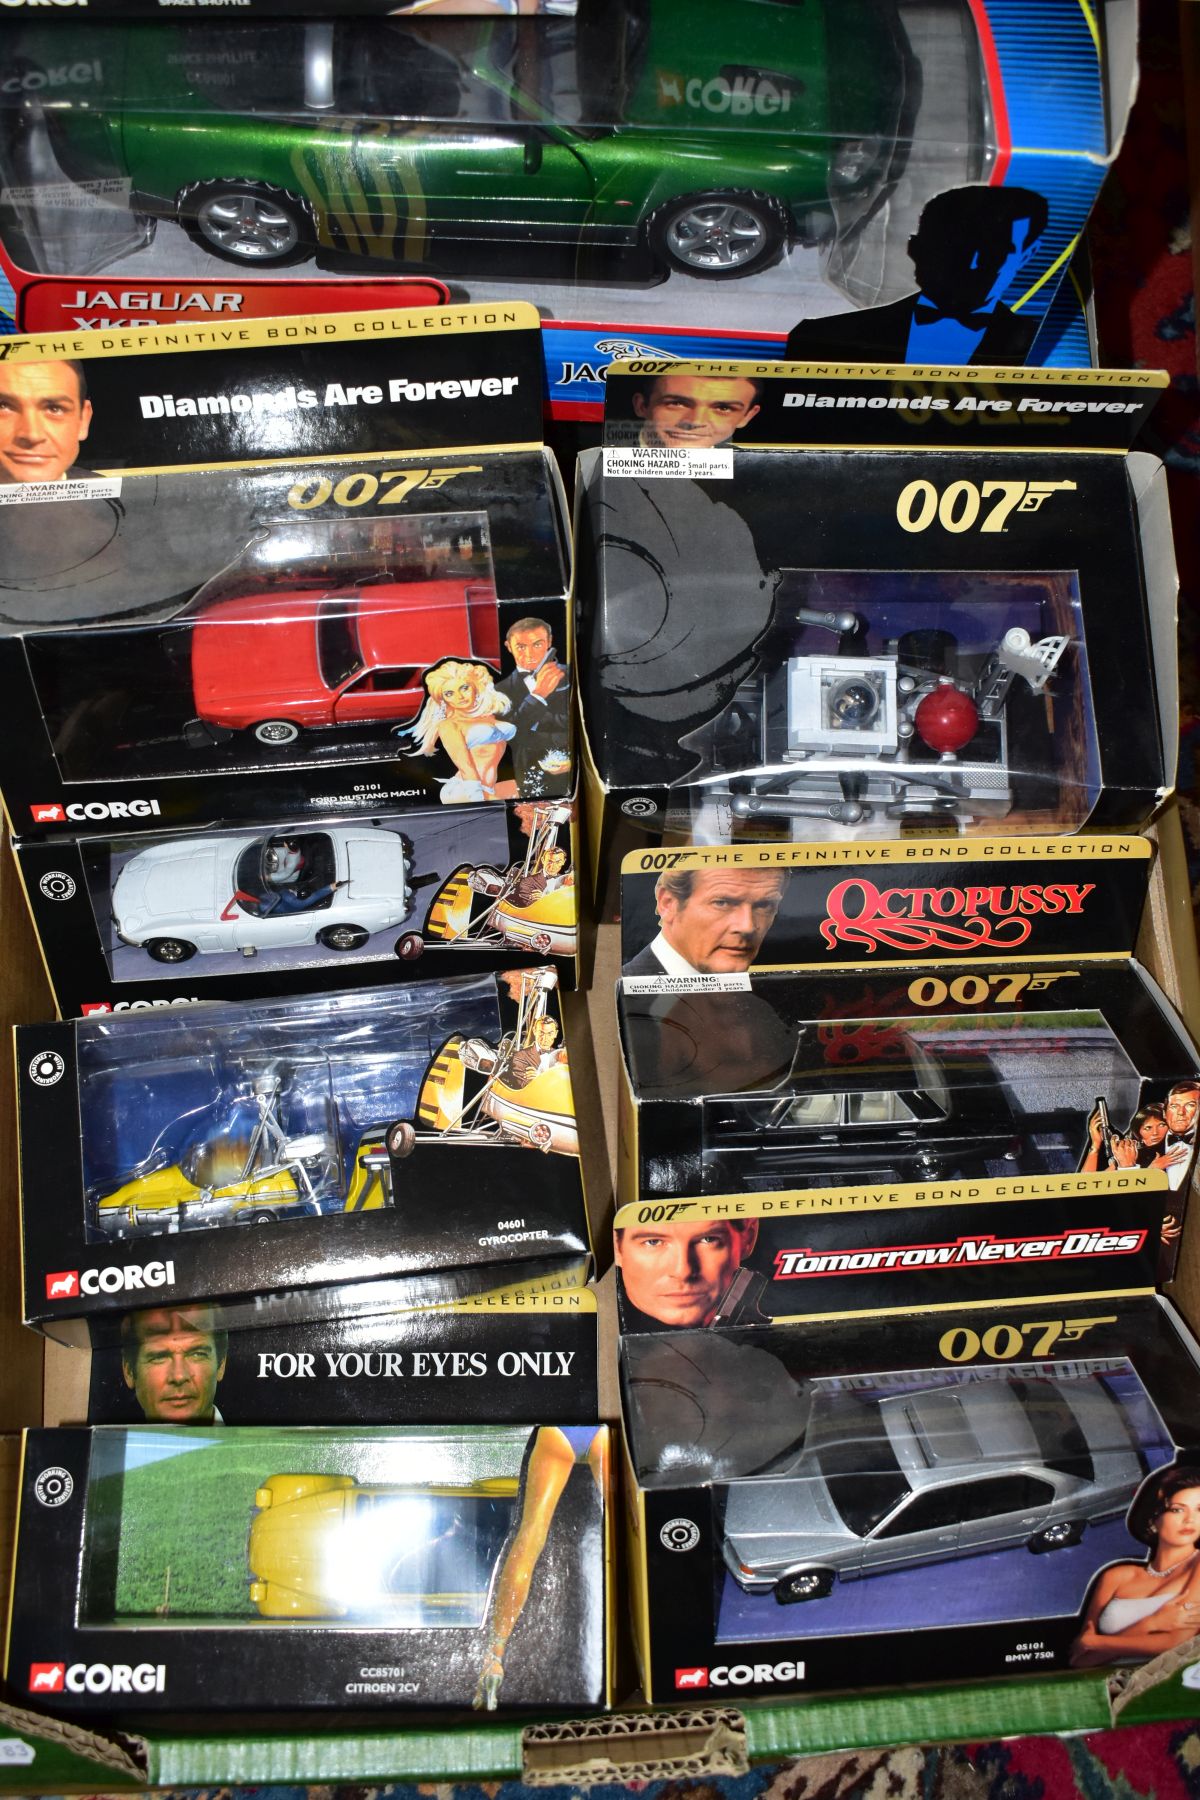 A COLLECTION OF BOXED CORGI CLASSICS JAMES BOND CARS, mainly from 'The Definitive Bond - Image 3 of 4